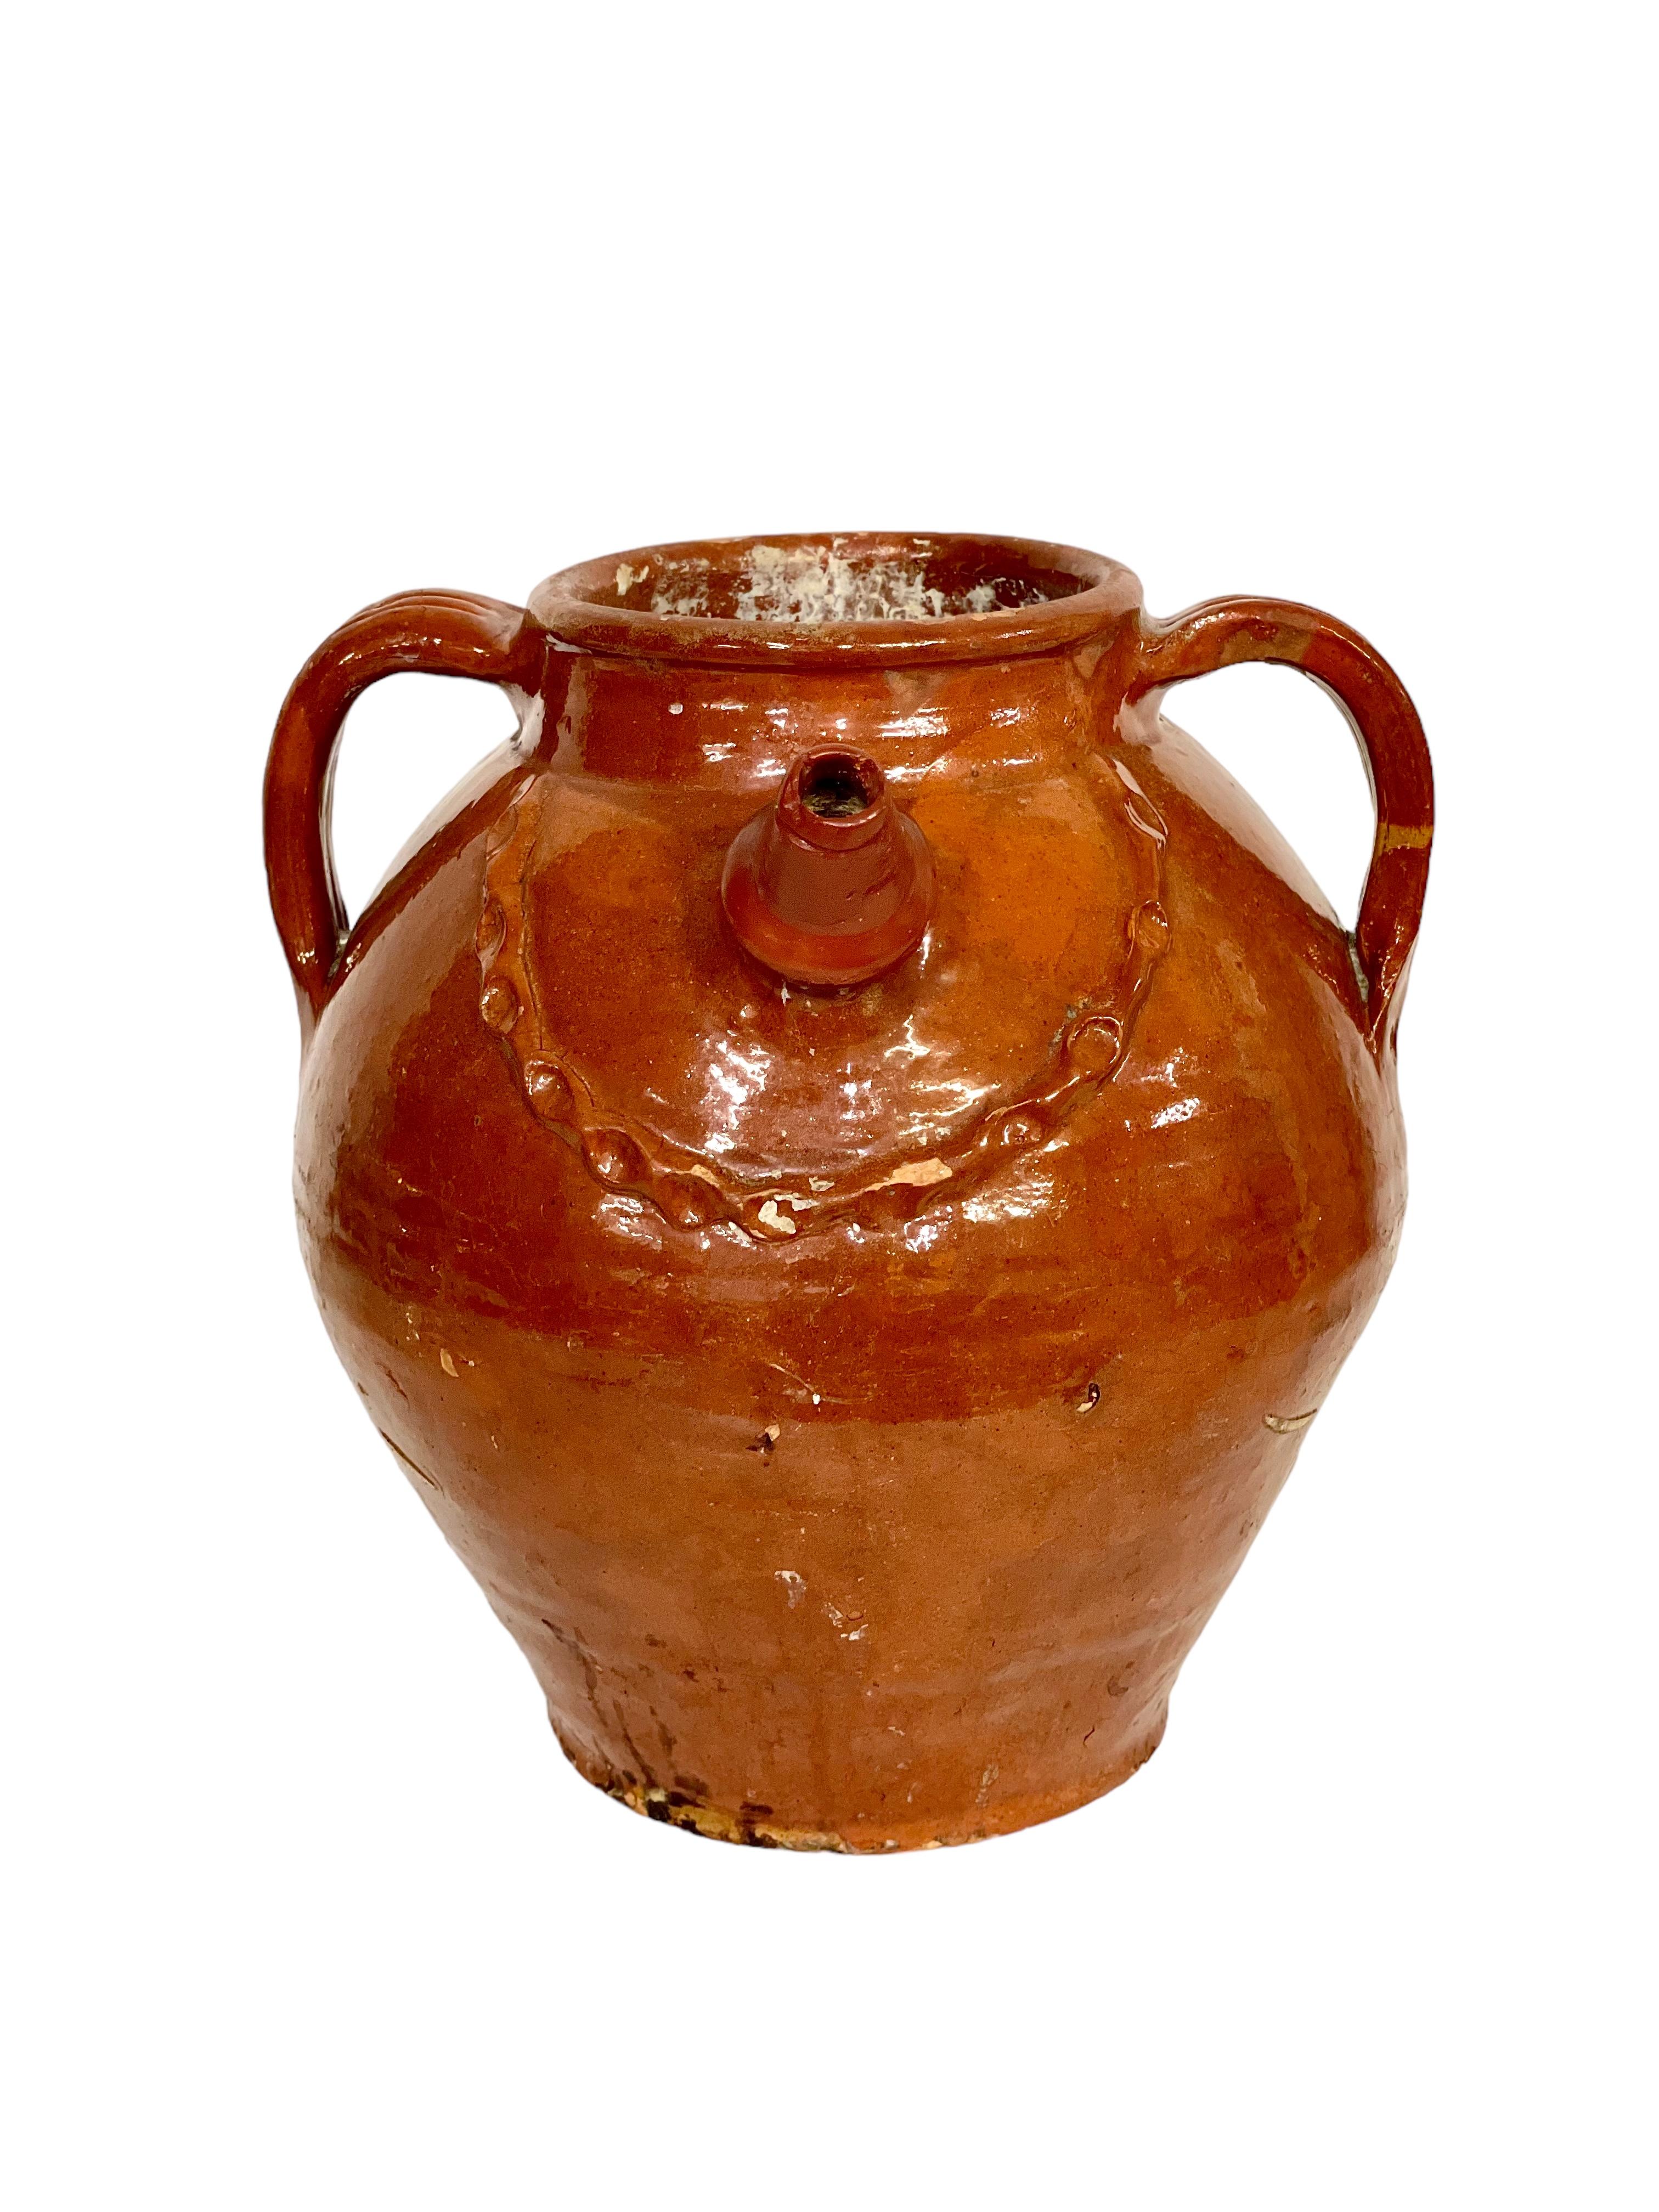 A charming and capacious 19th century walnut oil jug originating from the Dordogne region of south-west France, and decorated with a gorgeously glossy nut-brown glaze. Three shaped and grooved side handles encircle the wide rim, with a handcrafted